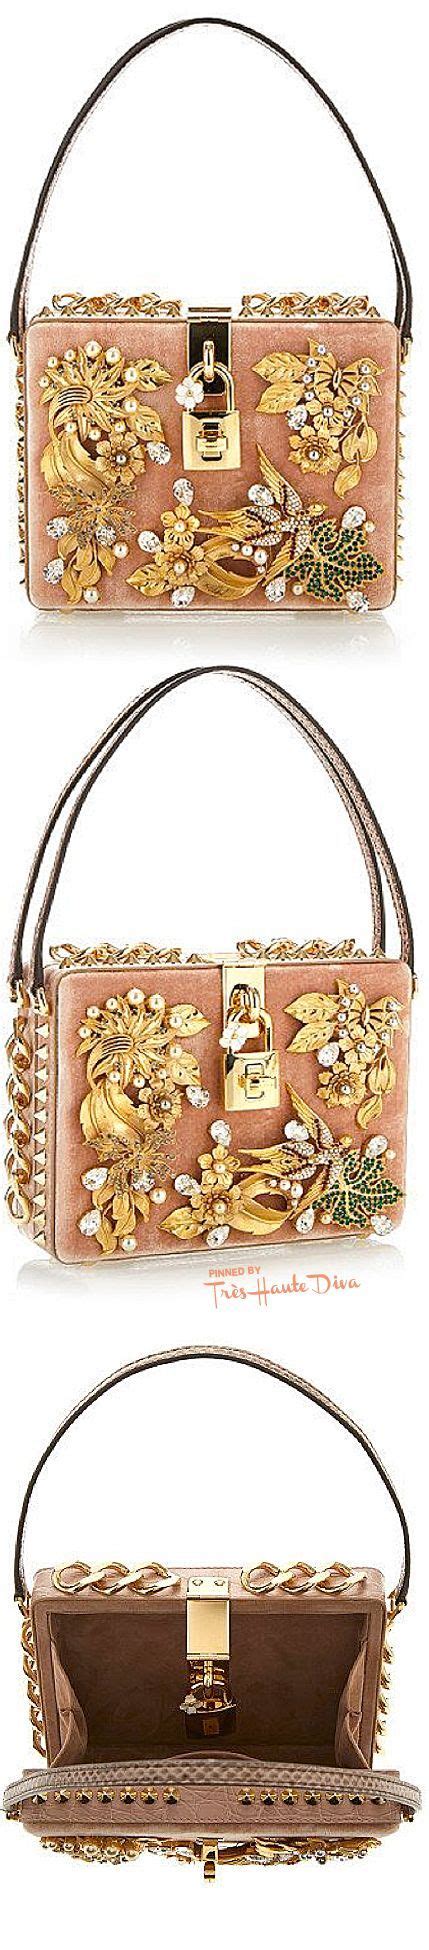 Dolce Gabbana FW Embellished Box Purse Bags Bag Accessories